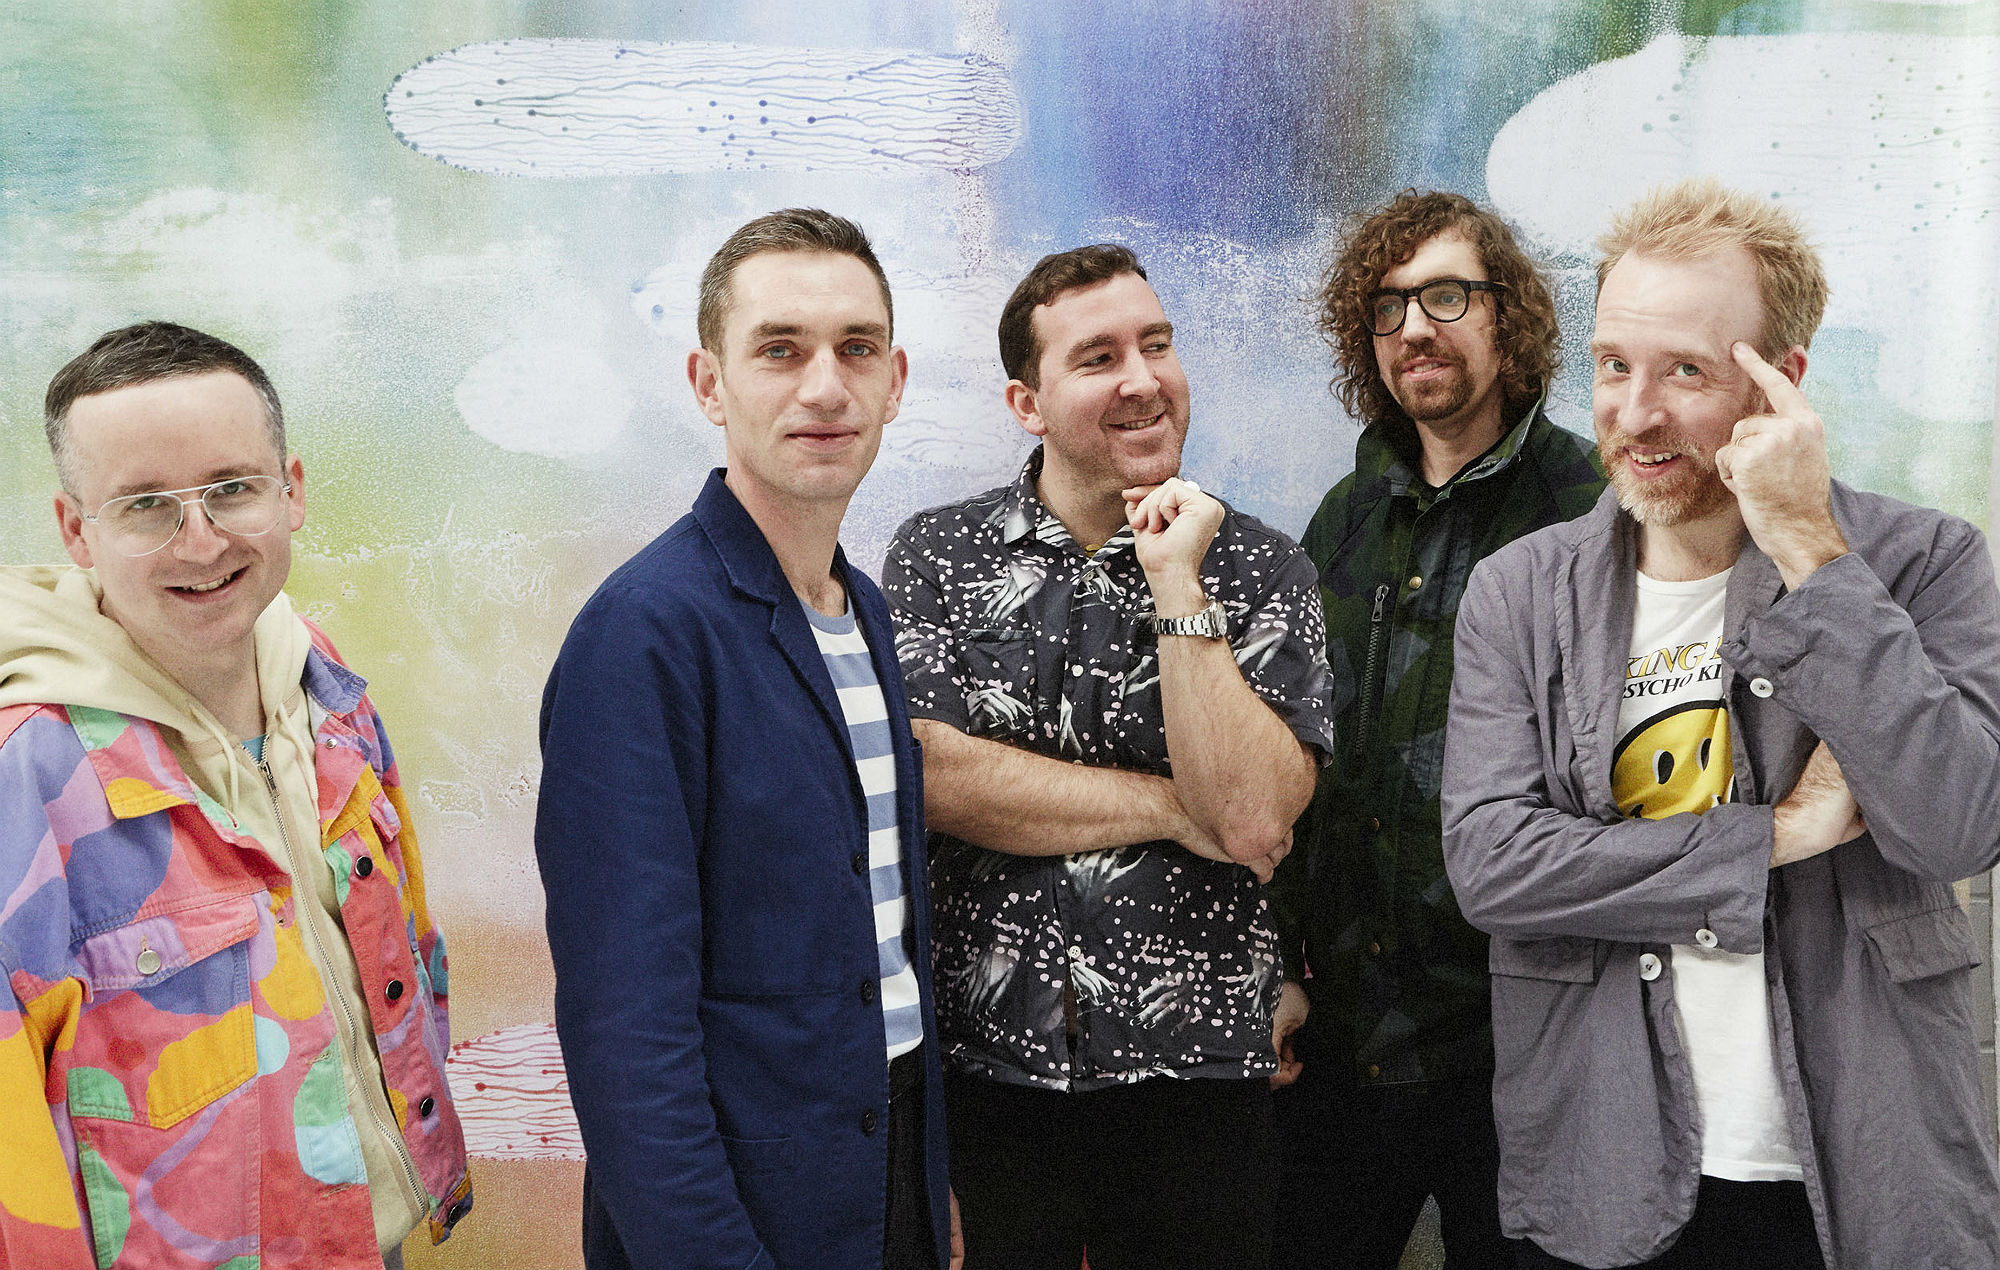 Hot Chip cover Velvet Underground’s ‘Candy Says’ and tell us about their new ‘Late Night Tales’ album